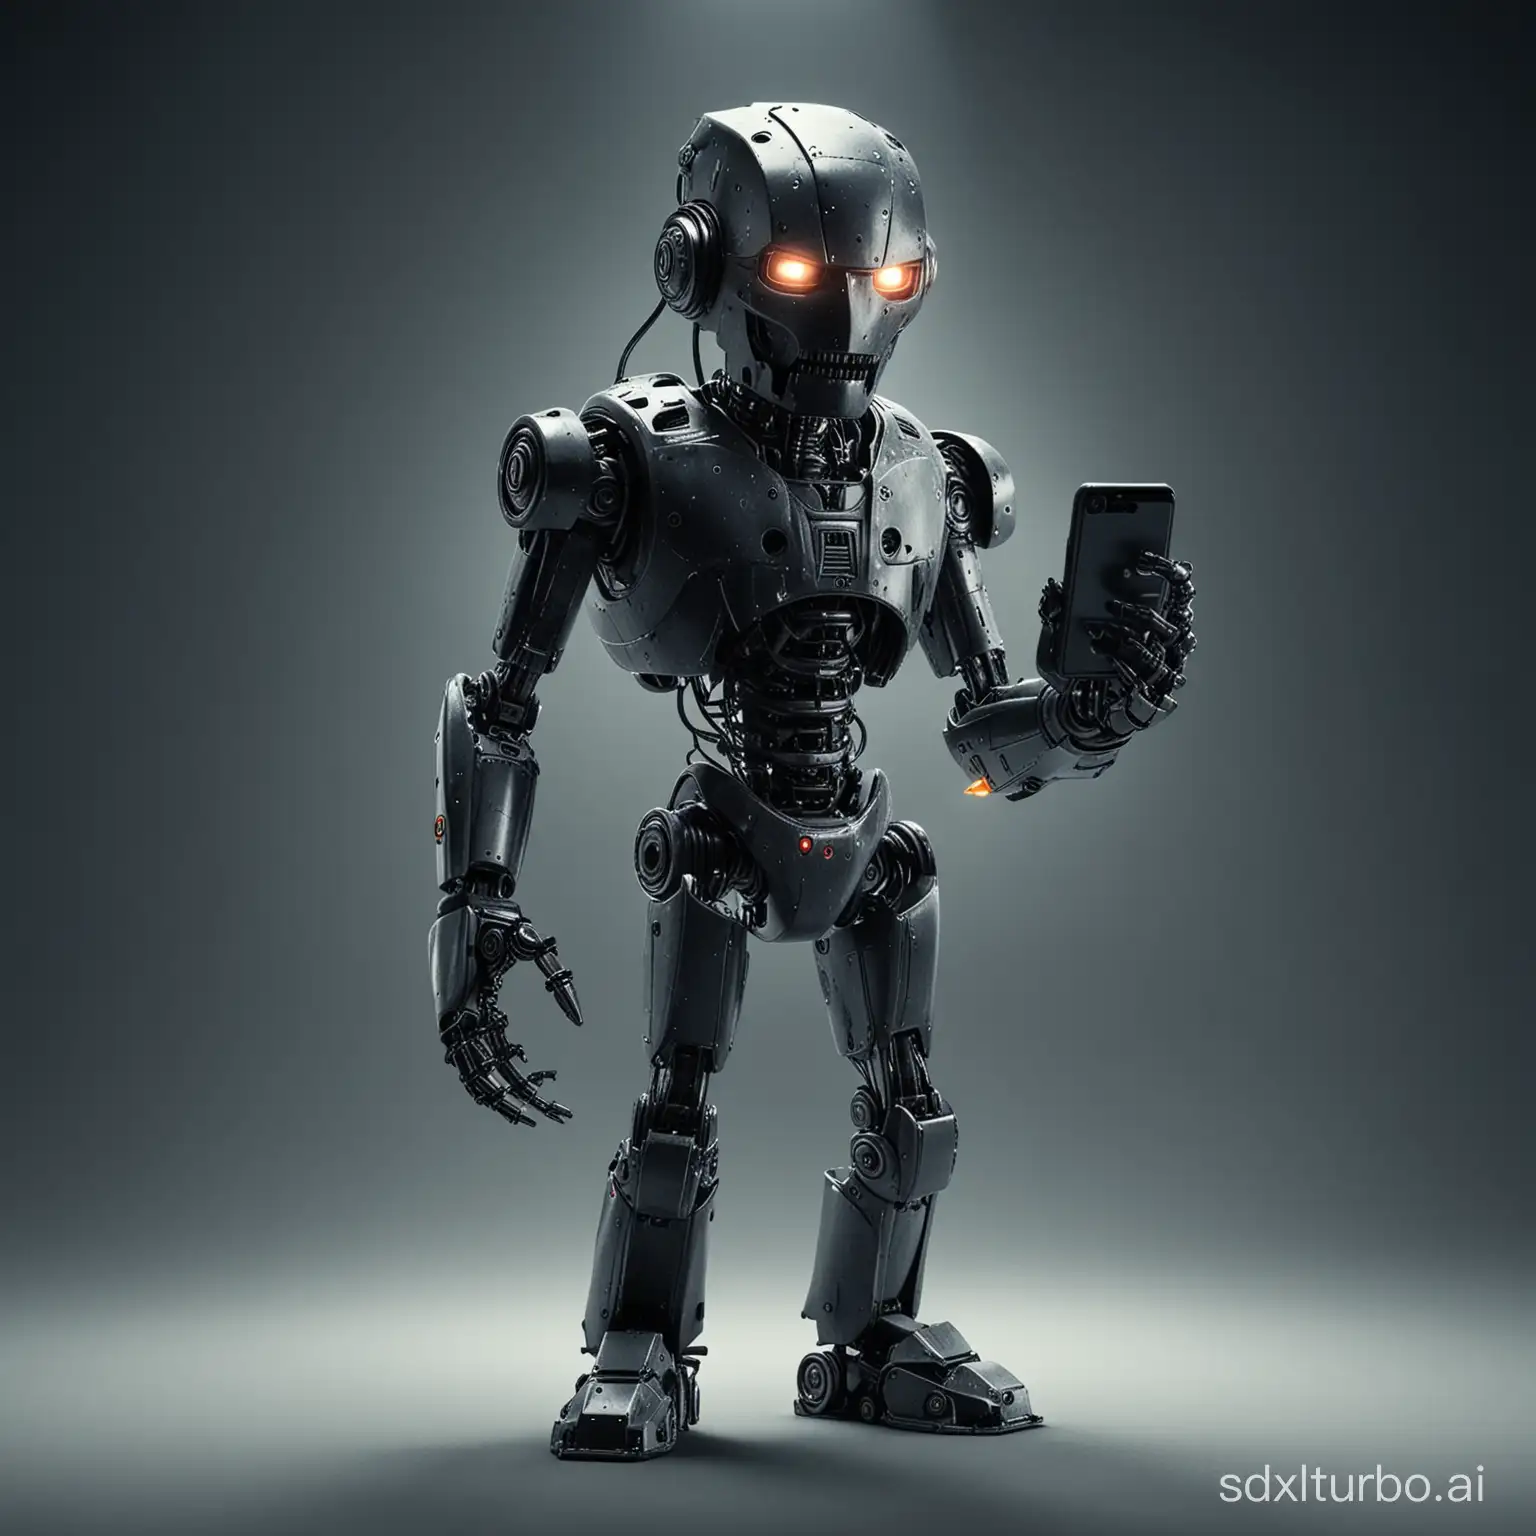 Sinister-Robot-with-Dramatic-Phone-Call